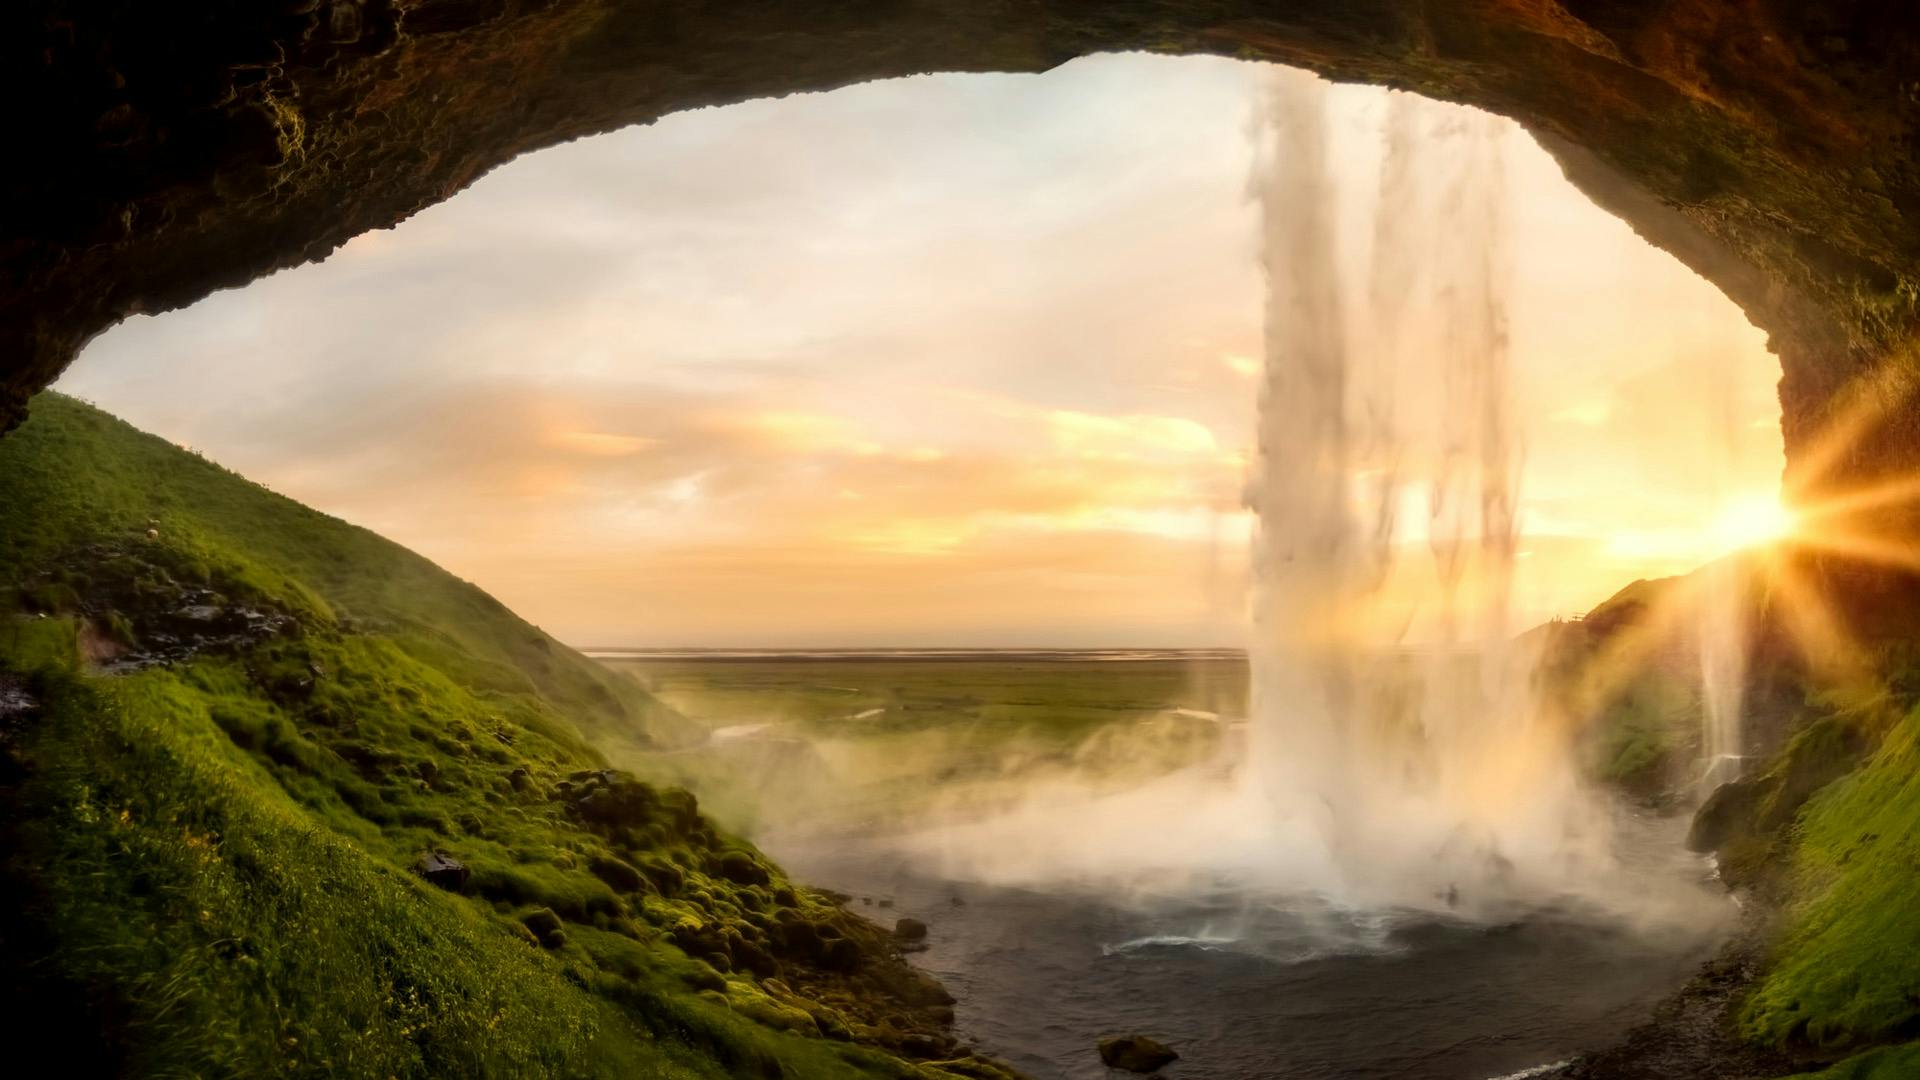 A waterfall photograph during a sunset.